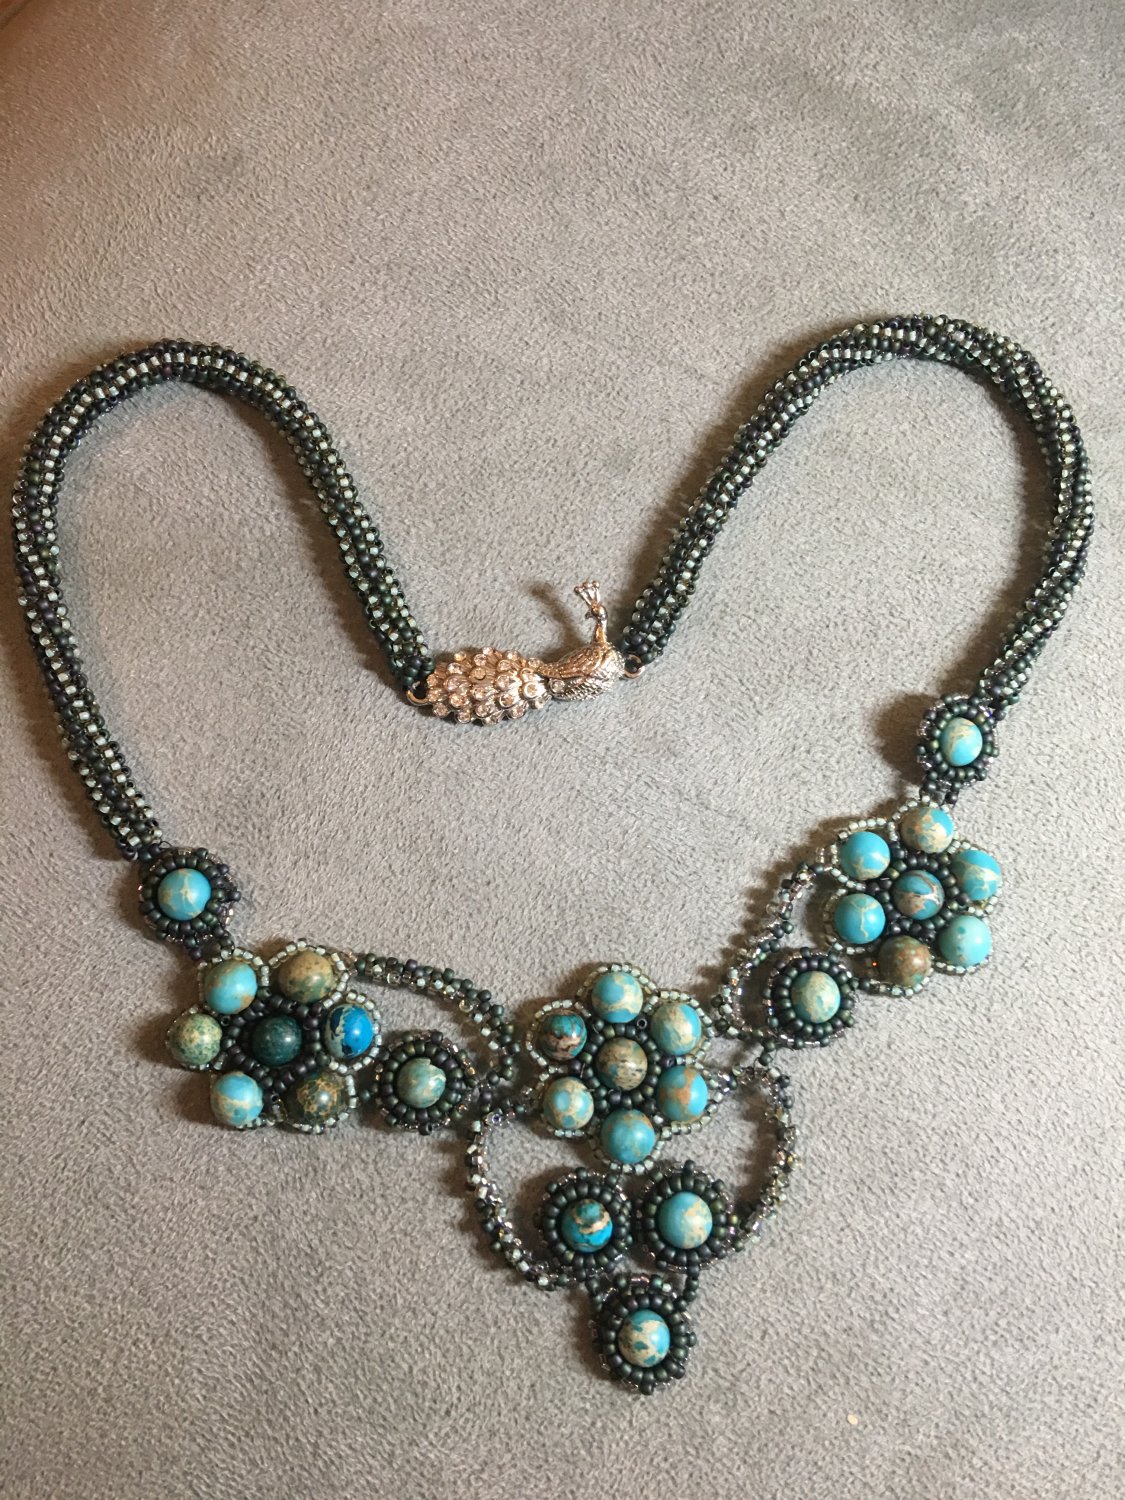 Peacock necklace